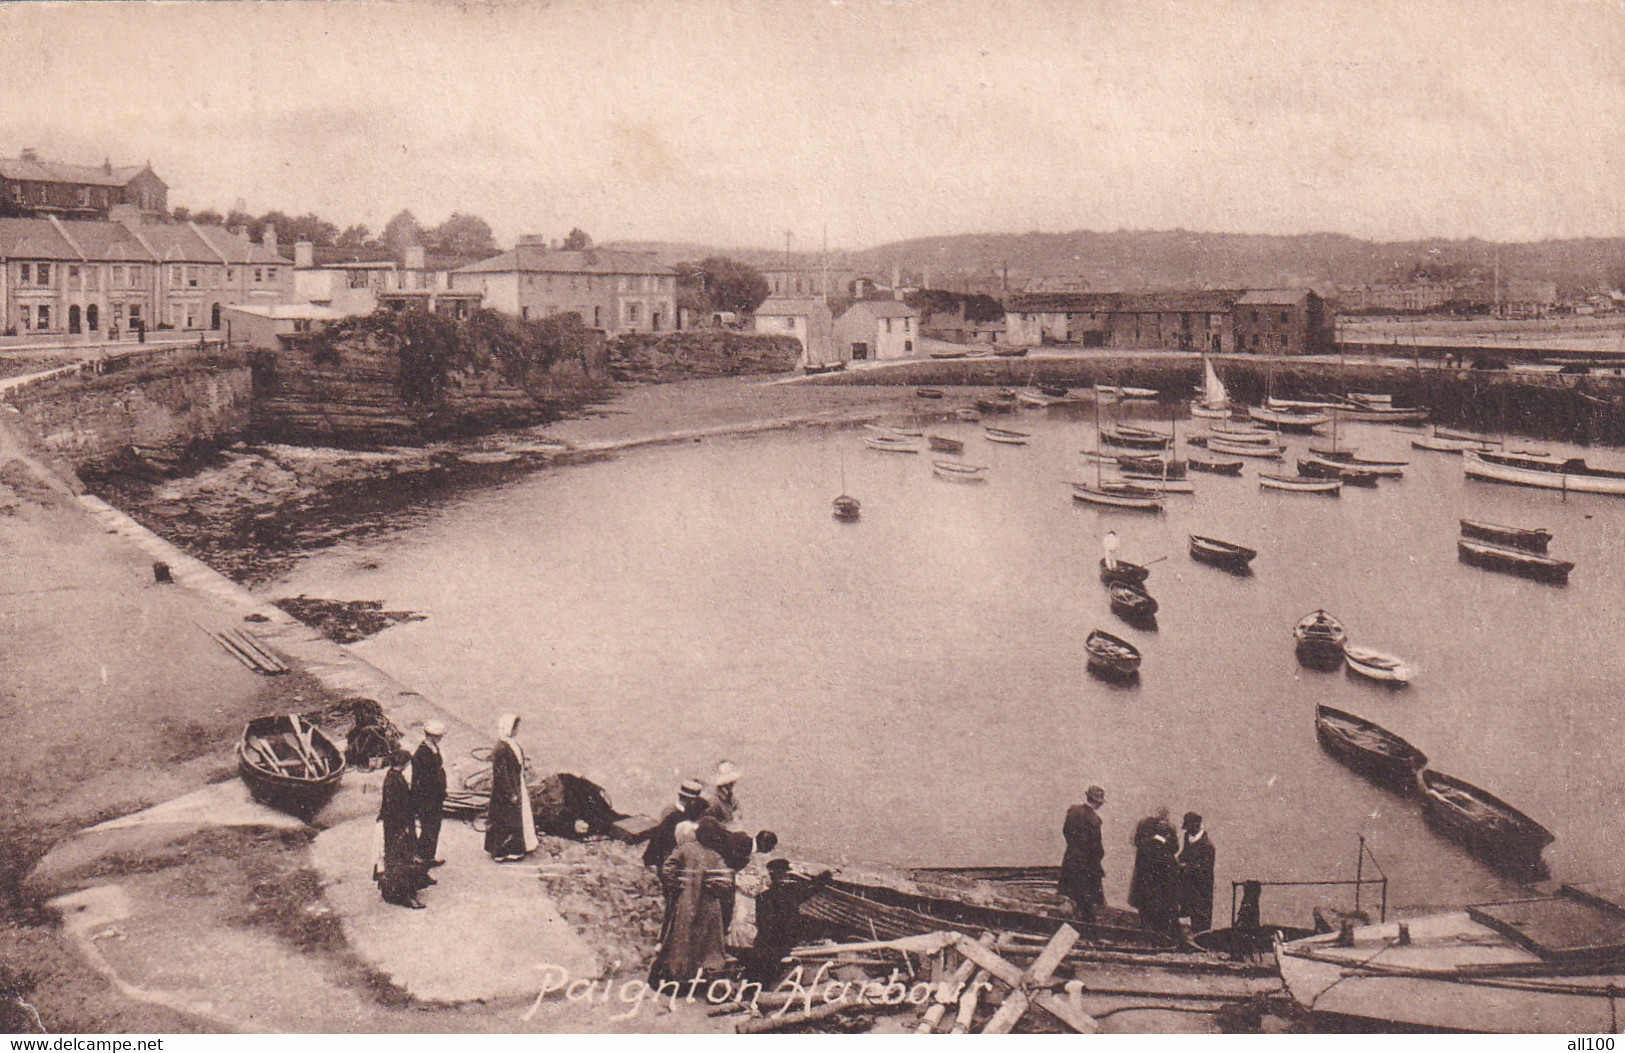 A18326- PAIGNTON HARBOUR BOAT FRITH'S SERIES POST CARD PRINTED IN ENGLAND UNUSED - Paignton